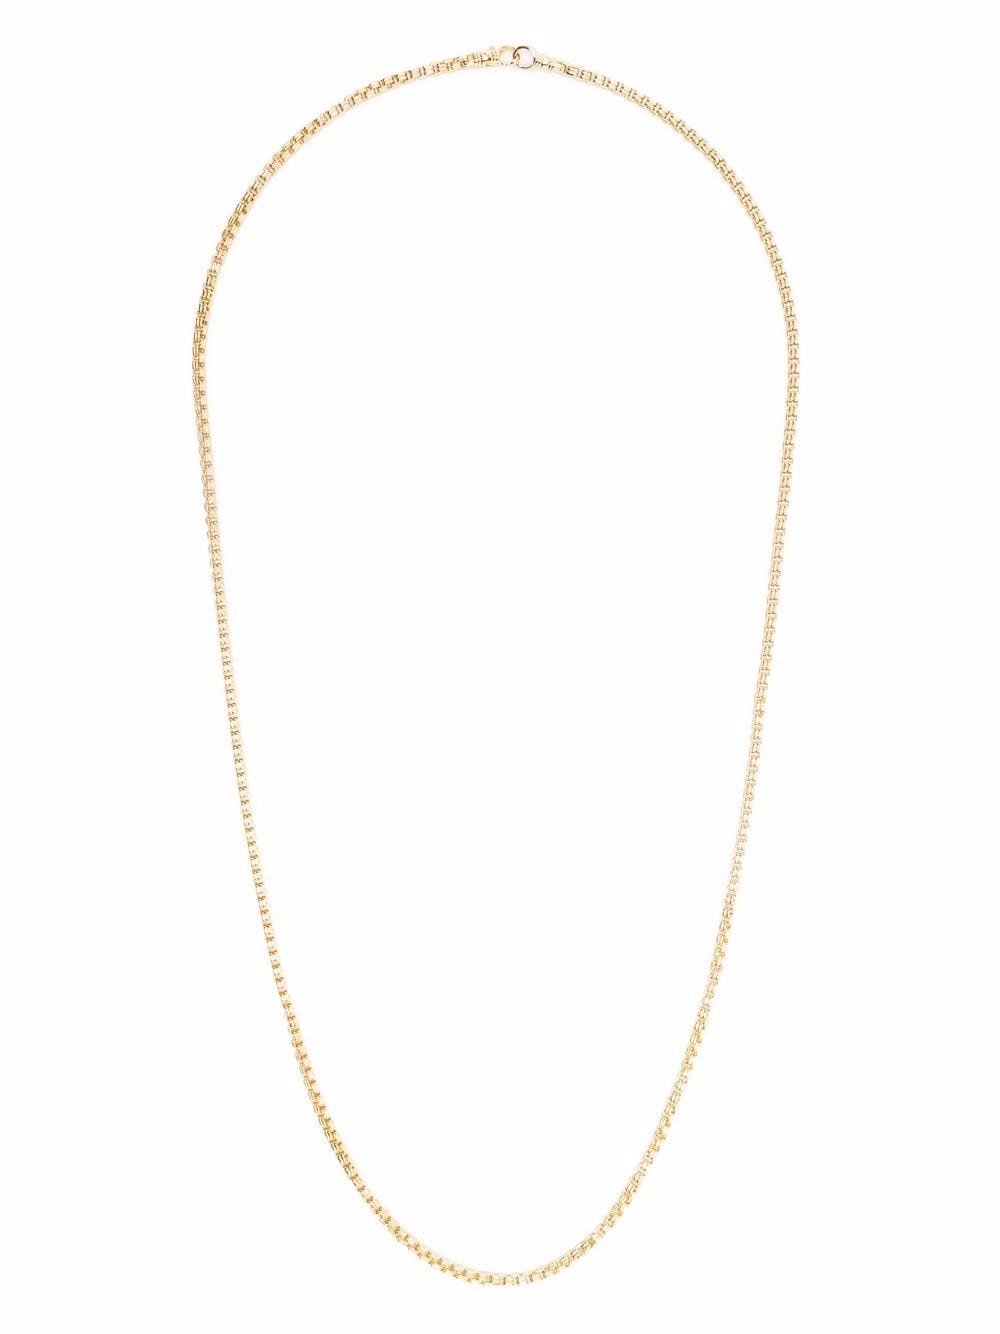 Tom Wood Venetian Chain Double gold-plated sterling-silver necklace von Tom Wood